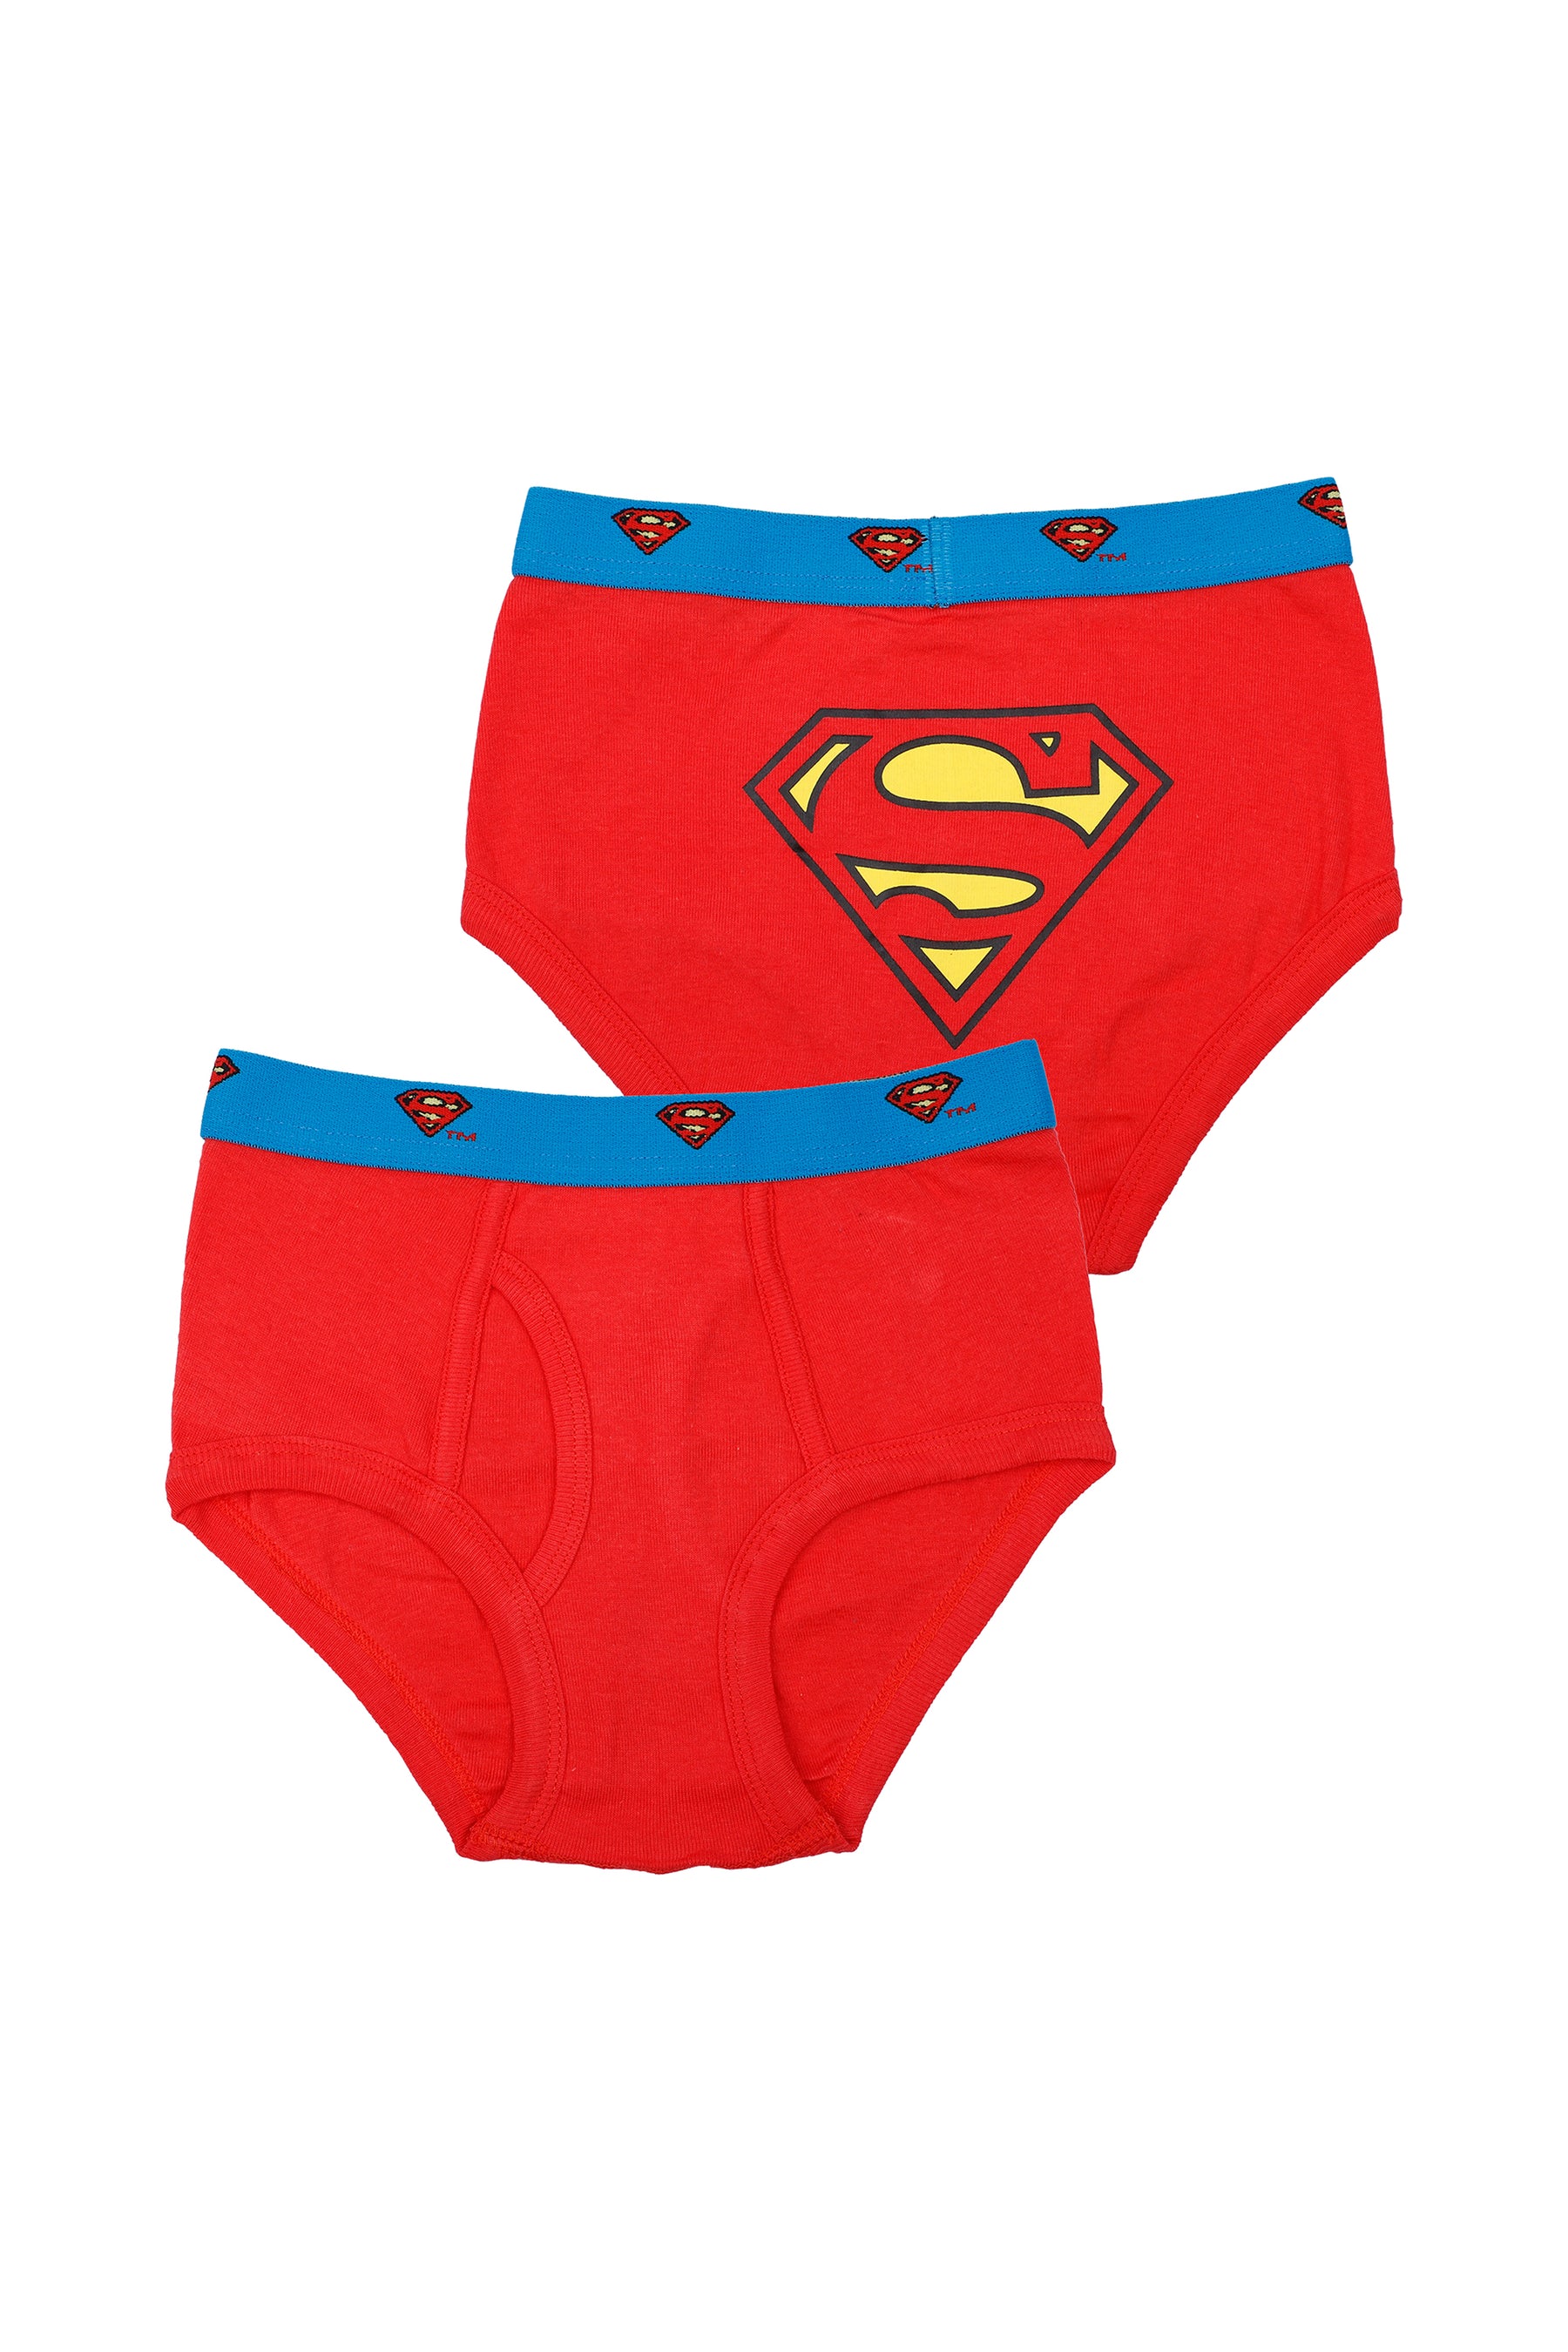 DC Comics Handcraft Little Boys' Justice League Brief (Pack of - Import It  All